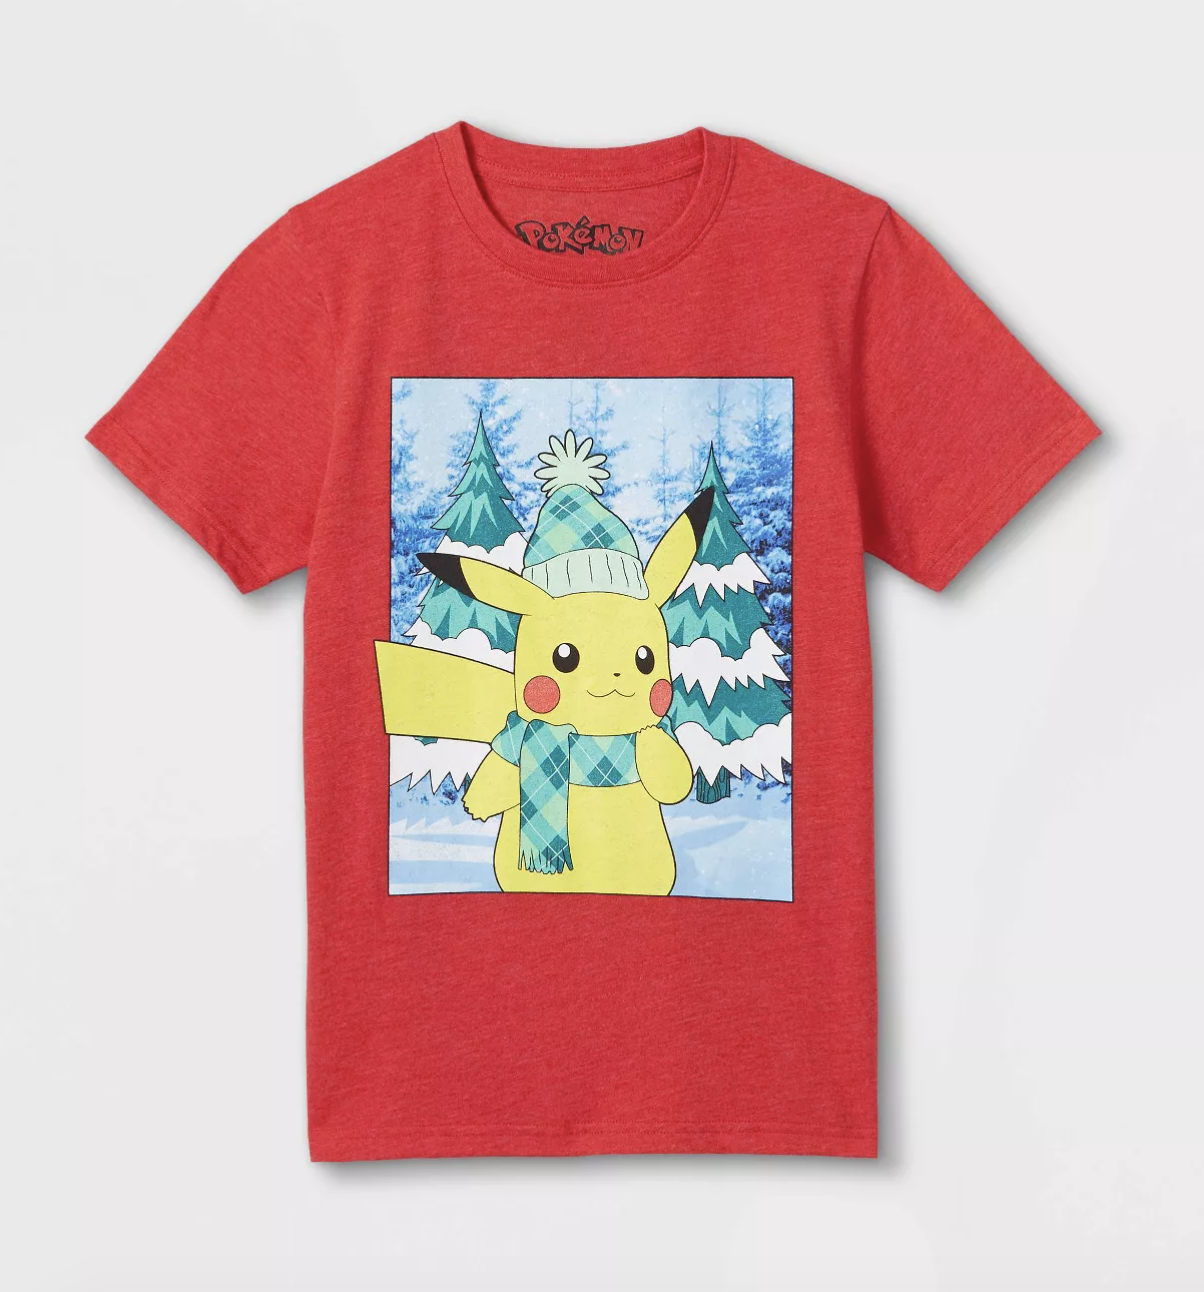 a red tee with an image of pikachu in a snowy forest wearing a hat and scarf